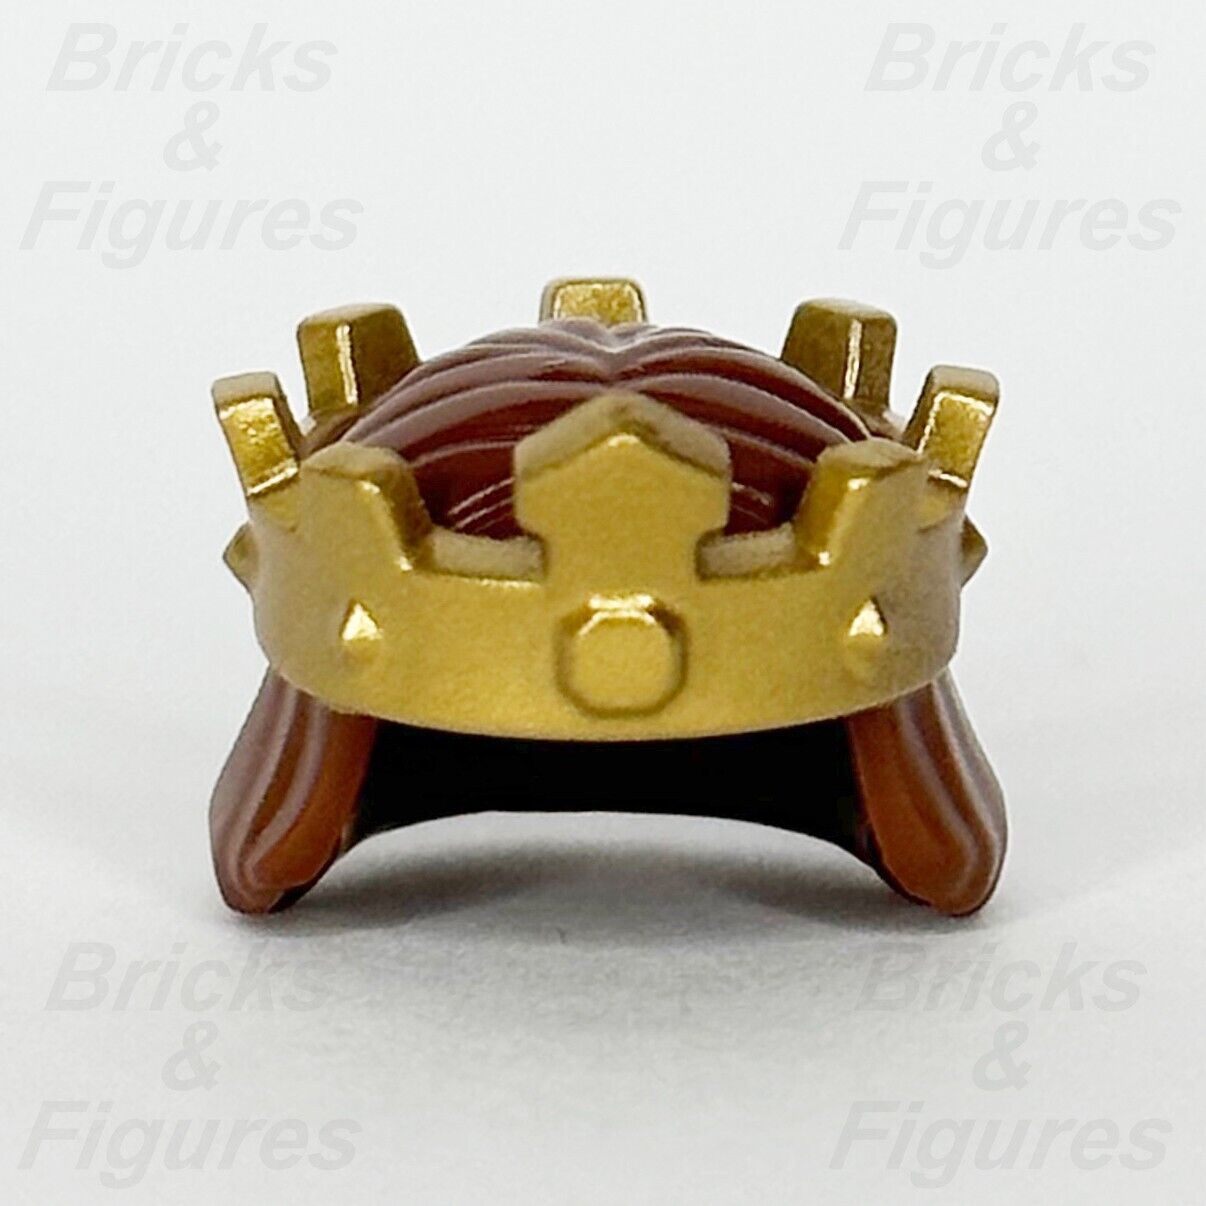 LEGO Castle Gold Crown with Reddish Brown Hair Minifigure Part 18835pb01 King 1